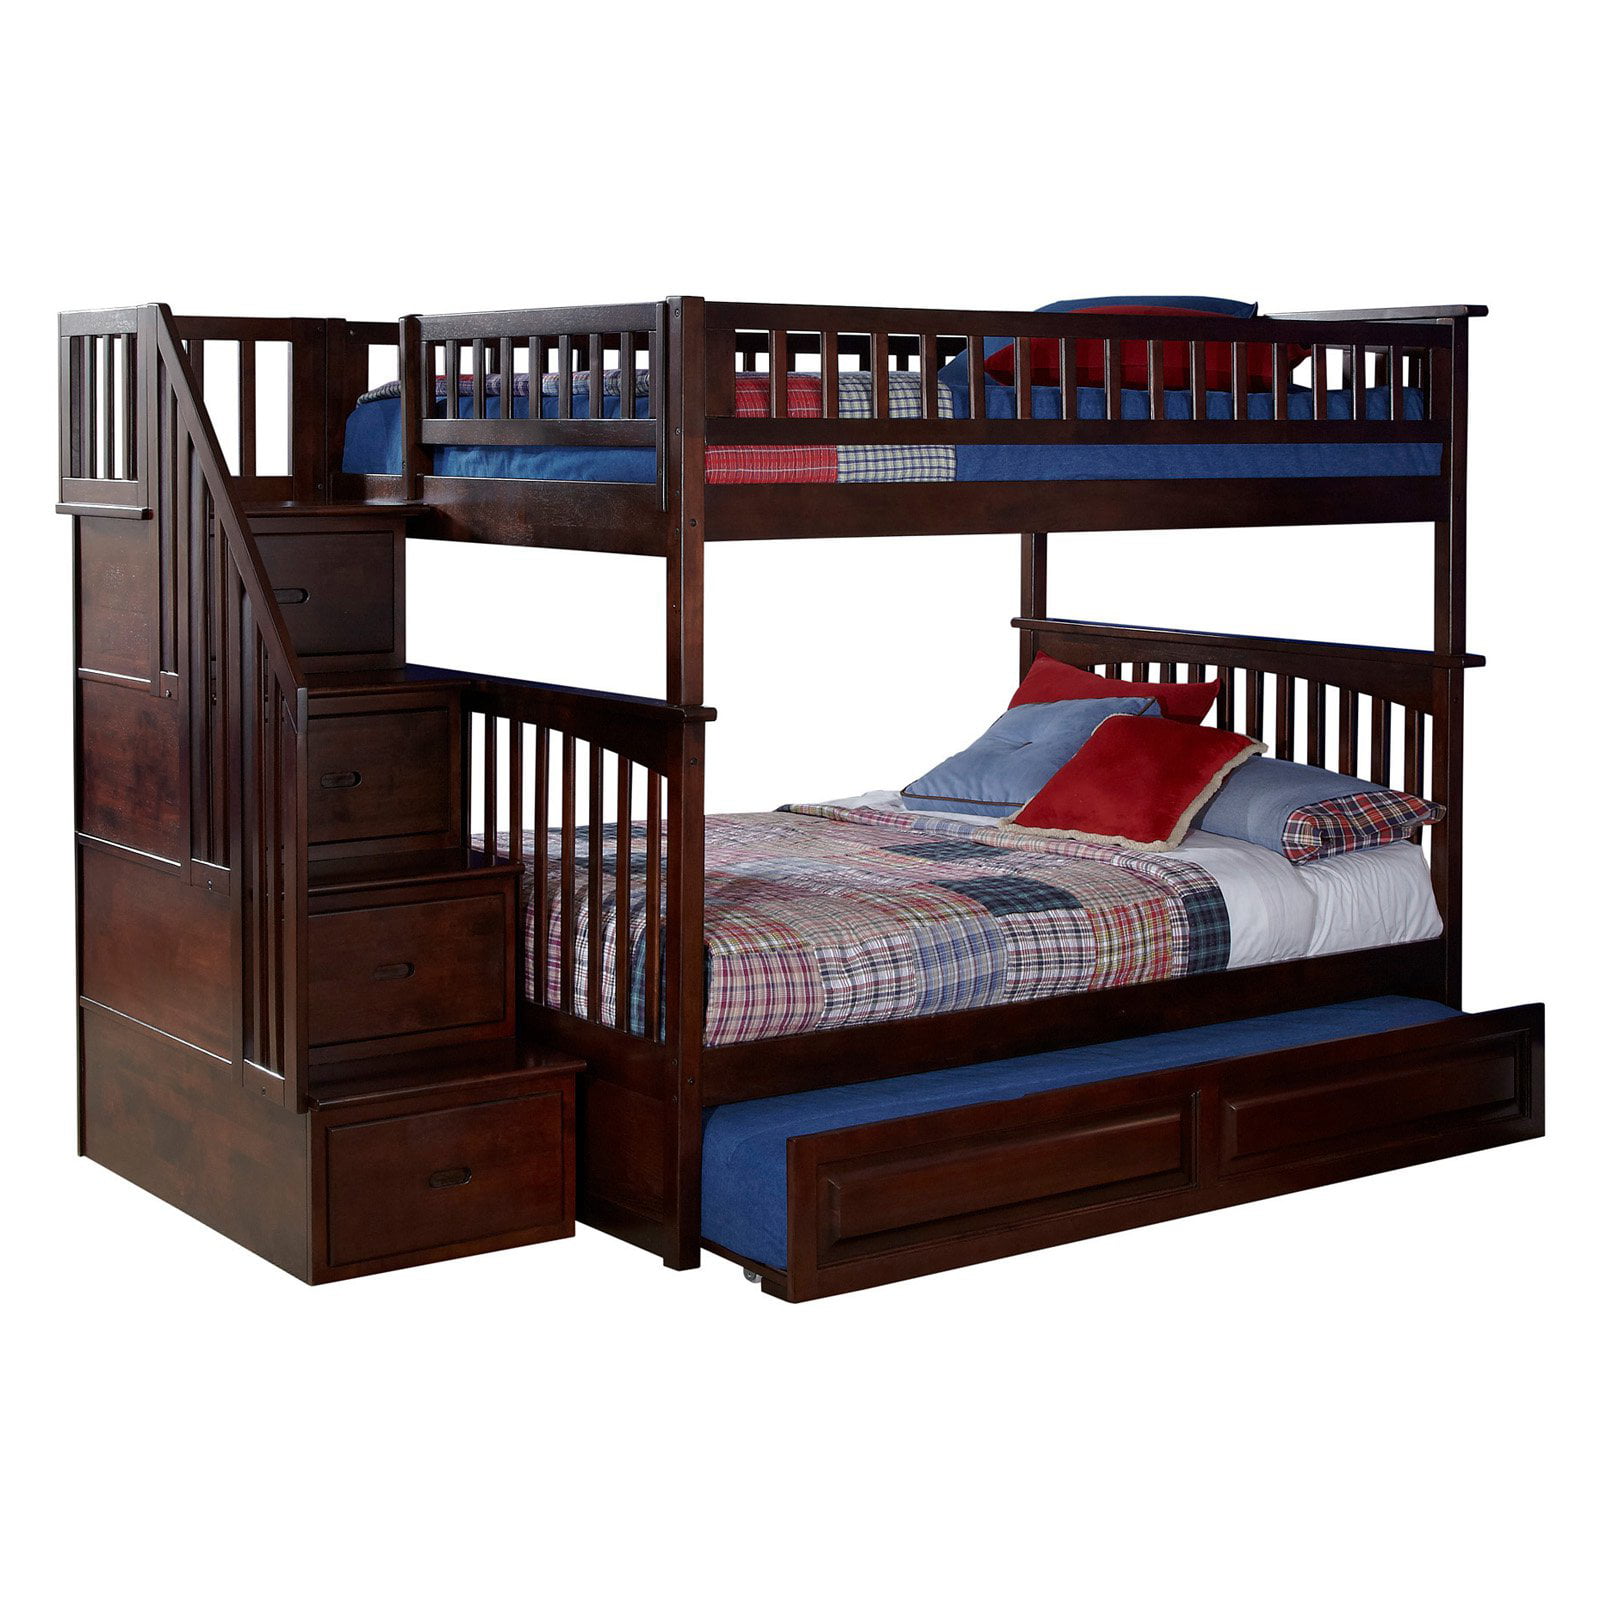 Atlantic Furniture Columbia Staircase Full Over Full Bunk Bed